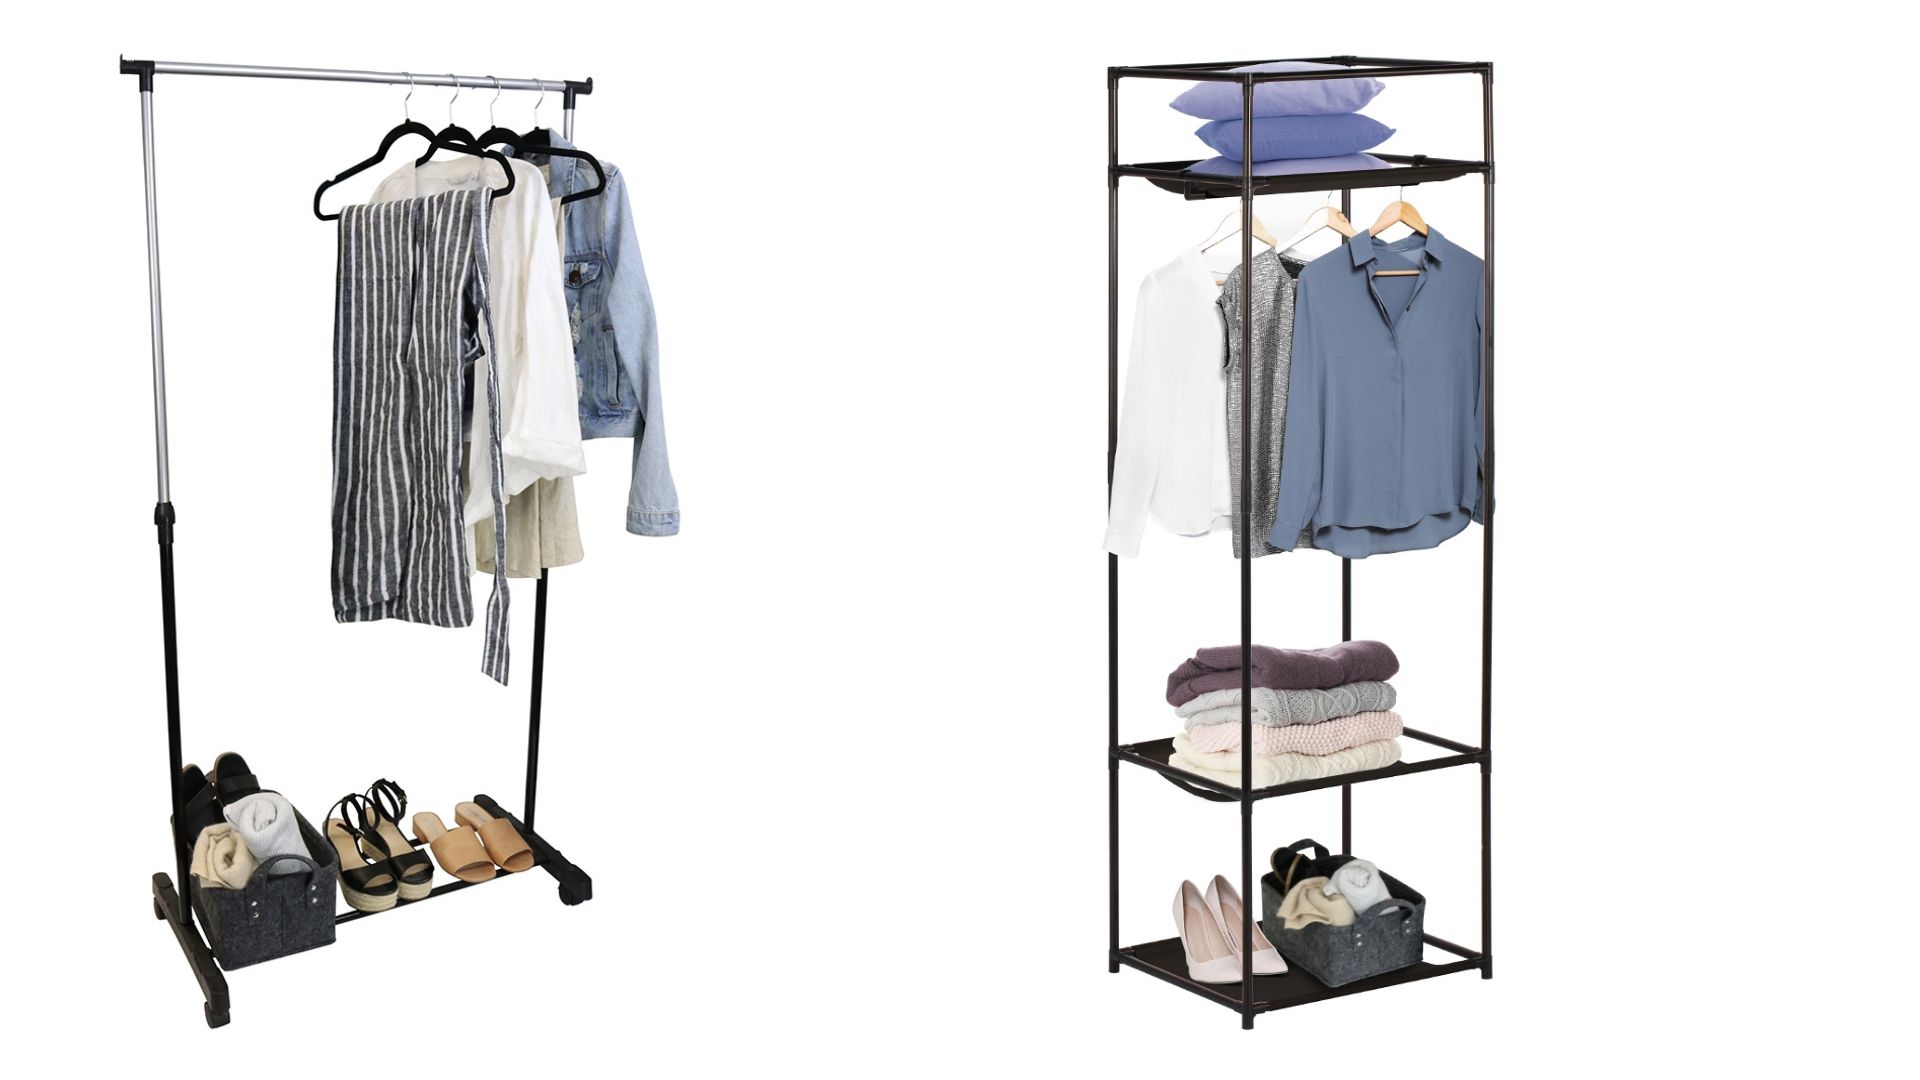 Give your guest room to unpack with a garment rack and coat hangers